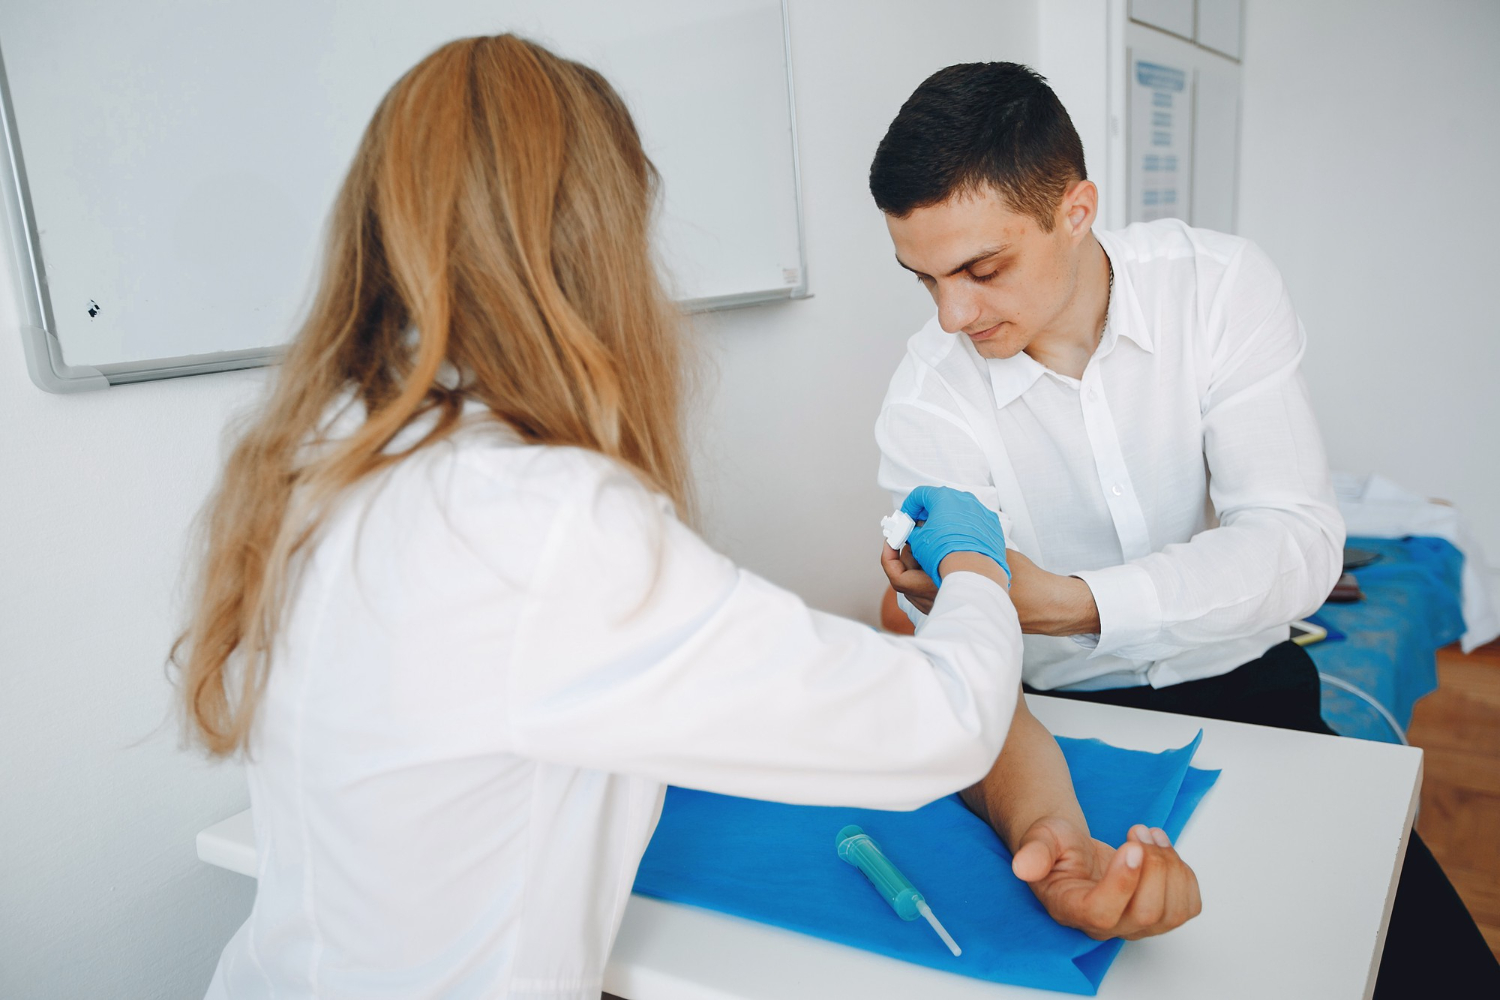 Medical Phlebotomy Technician Training in Sugarland